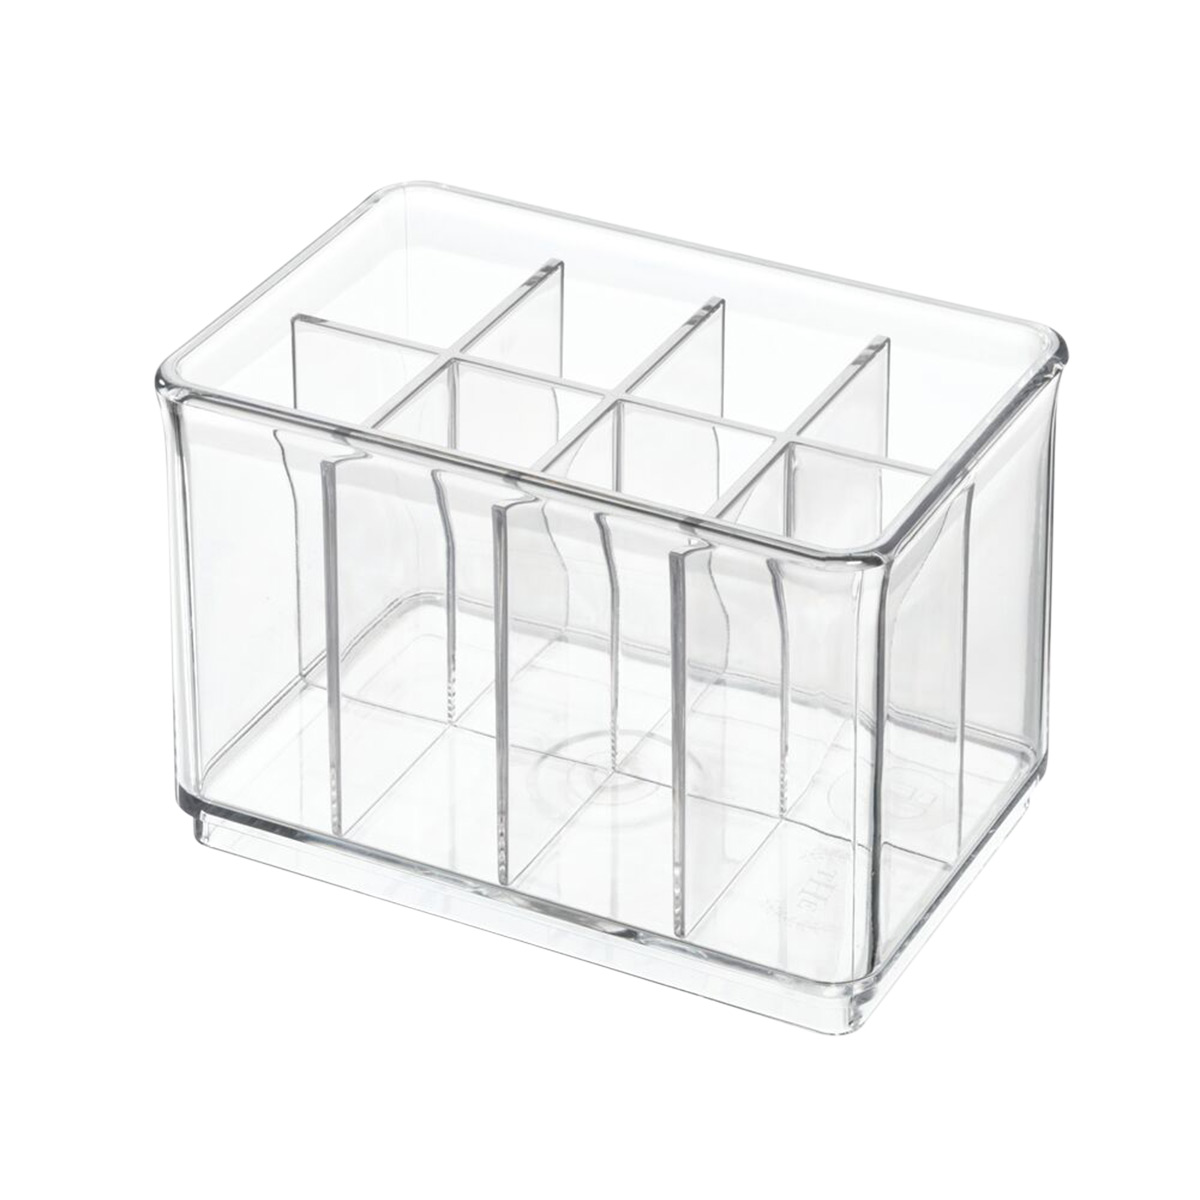 https://www.containerstore.com/catalogimages/392992/10082303-THE-Small-Bin-Divider-VEN2.jpg